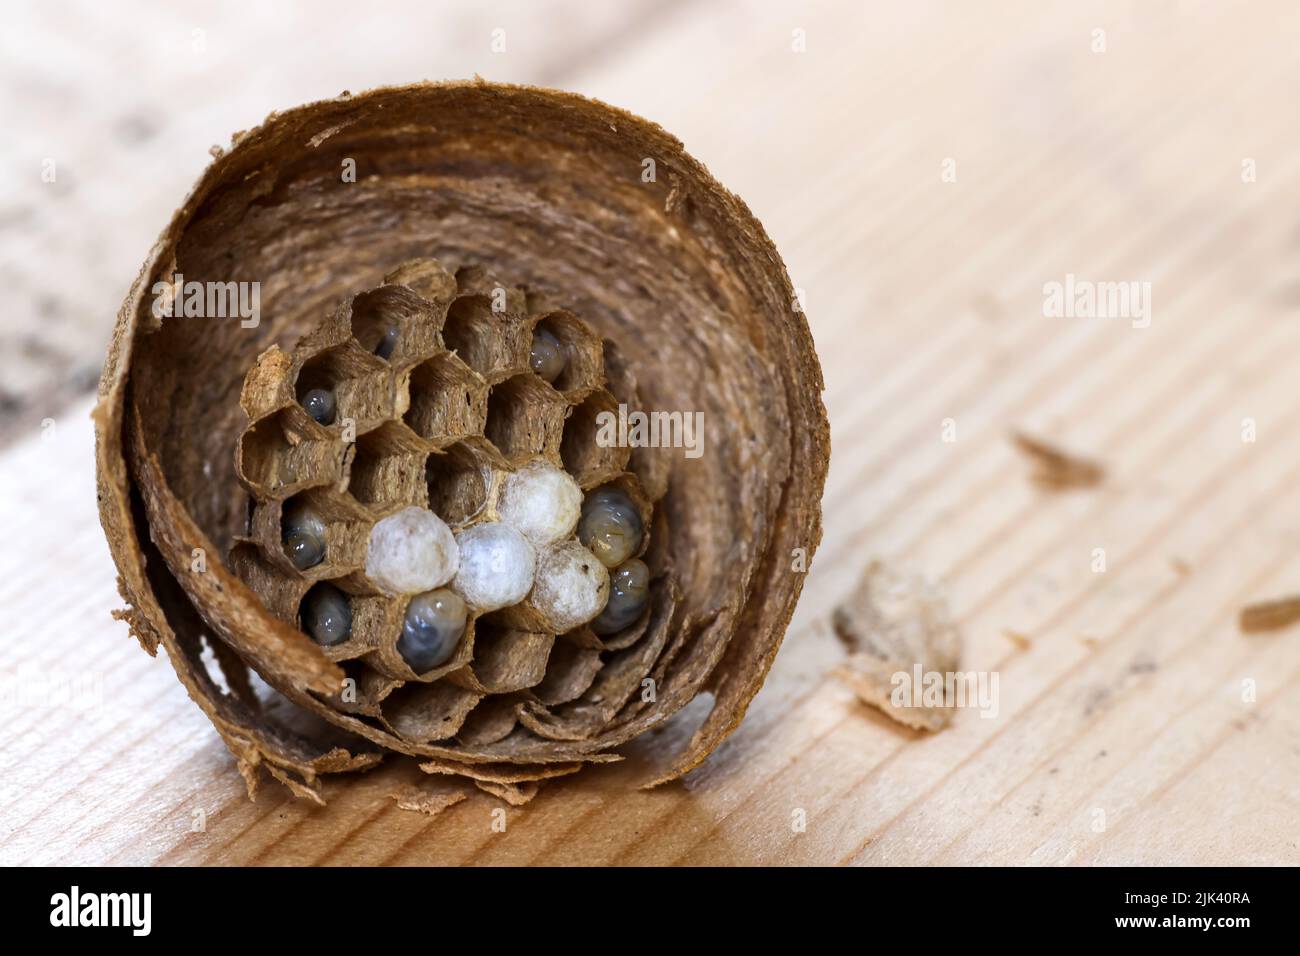 Wasp nest interior showing larvae in hexagonal cells with eggs at various stages of development. Macro close-up closeup. Dublin, Ireland Stock Photo